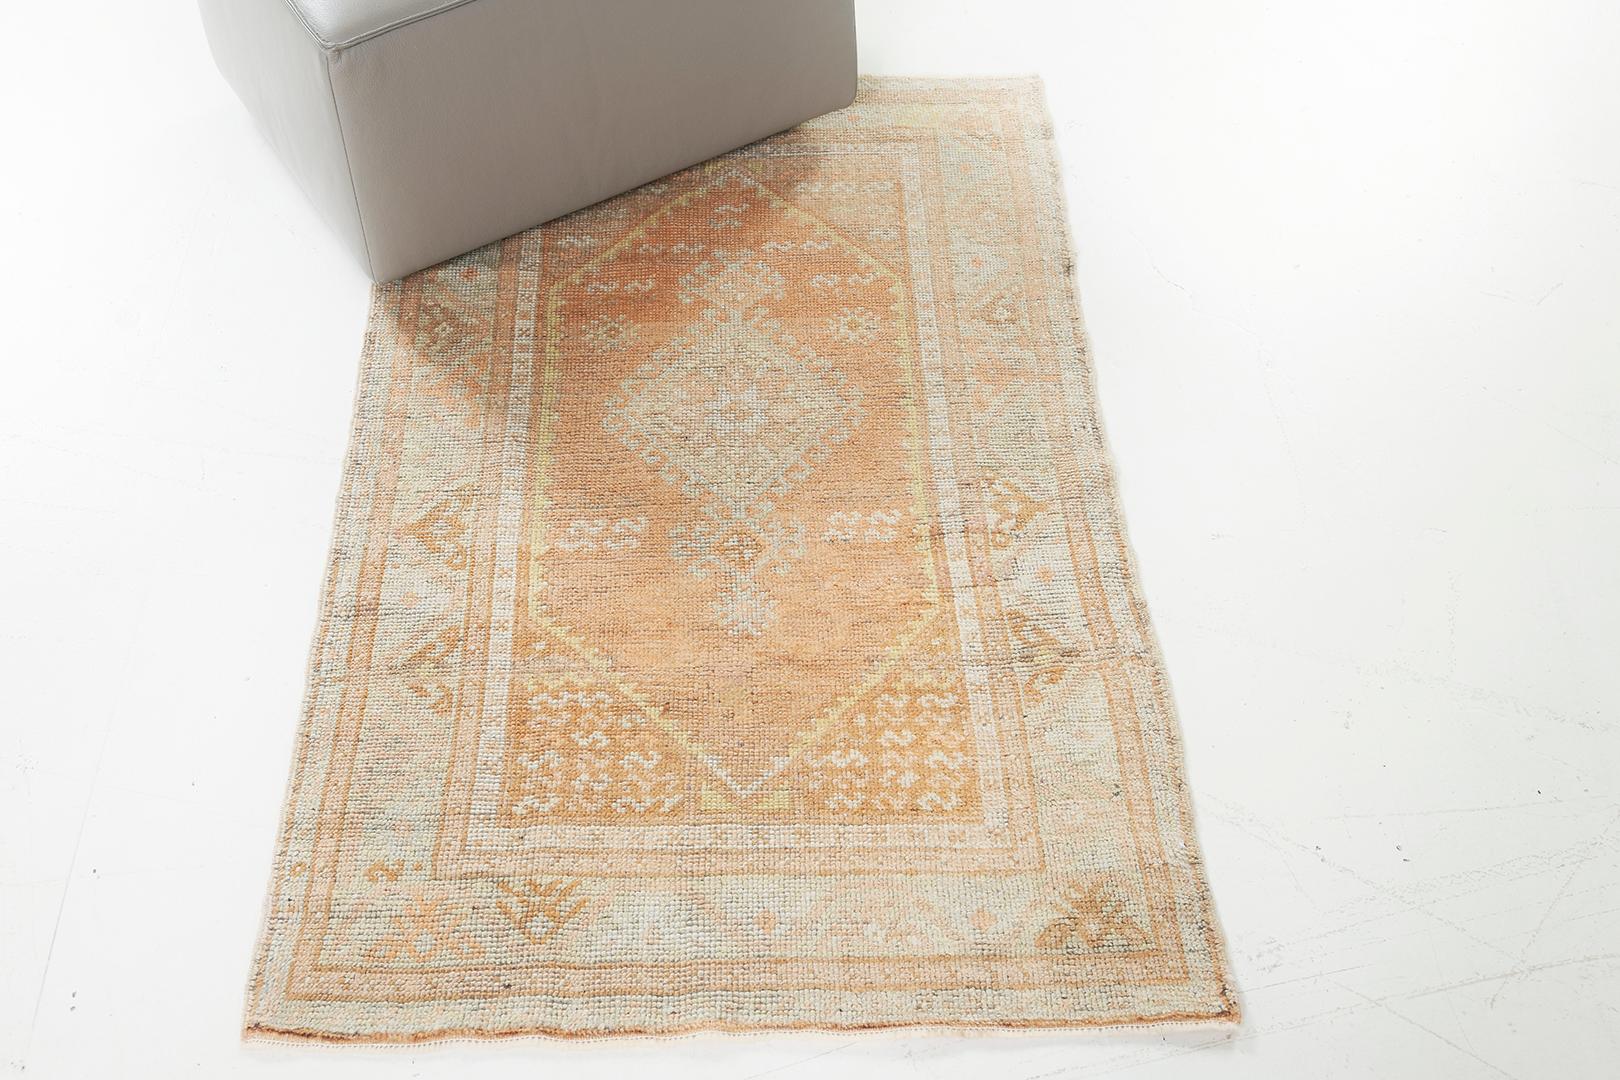 This Vintage Turkish Anatolian rug features a majestic central lozenge medallion starring on the apricot field. A stylized botanical meander border flanked with inner and outer flower guard bands create a breathtaking frame for this work of art.